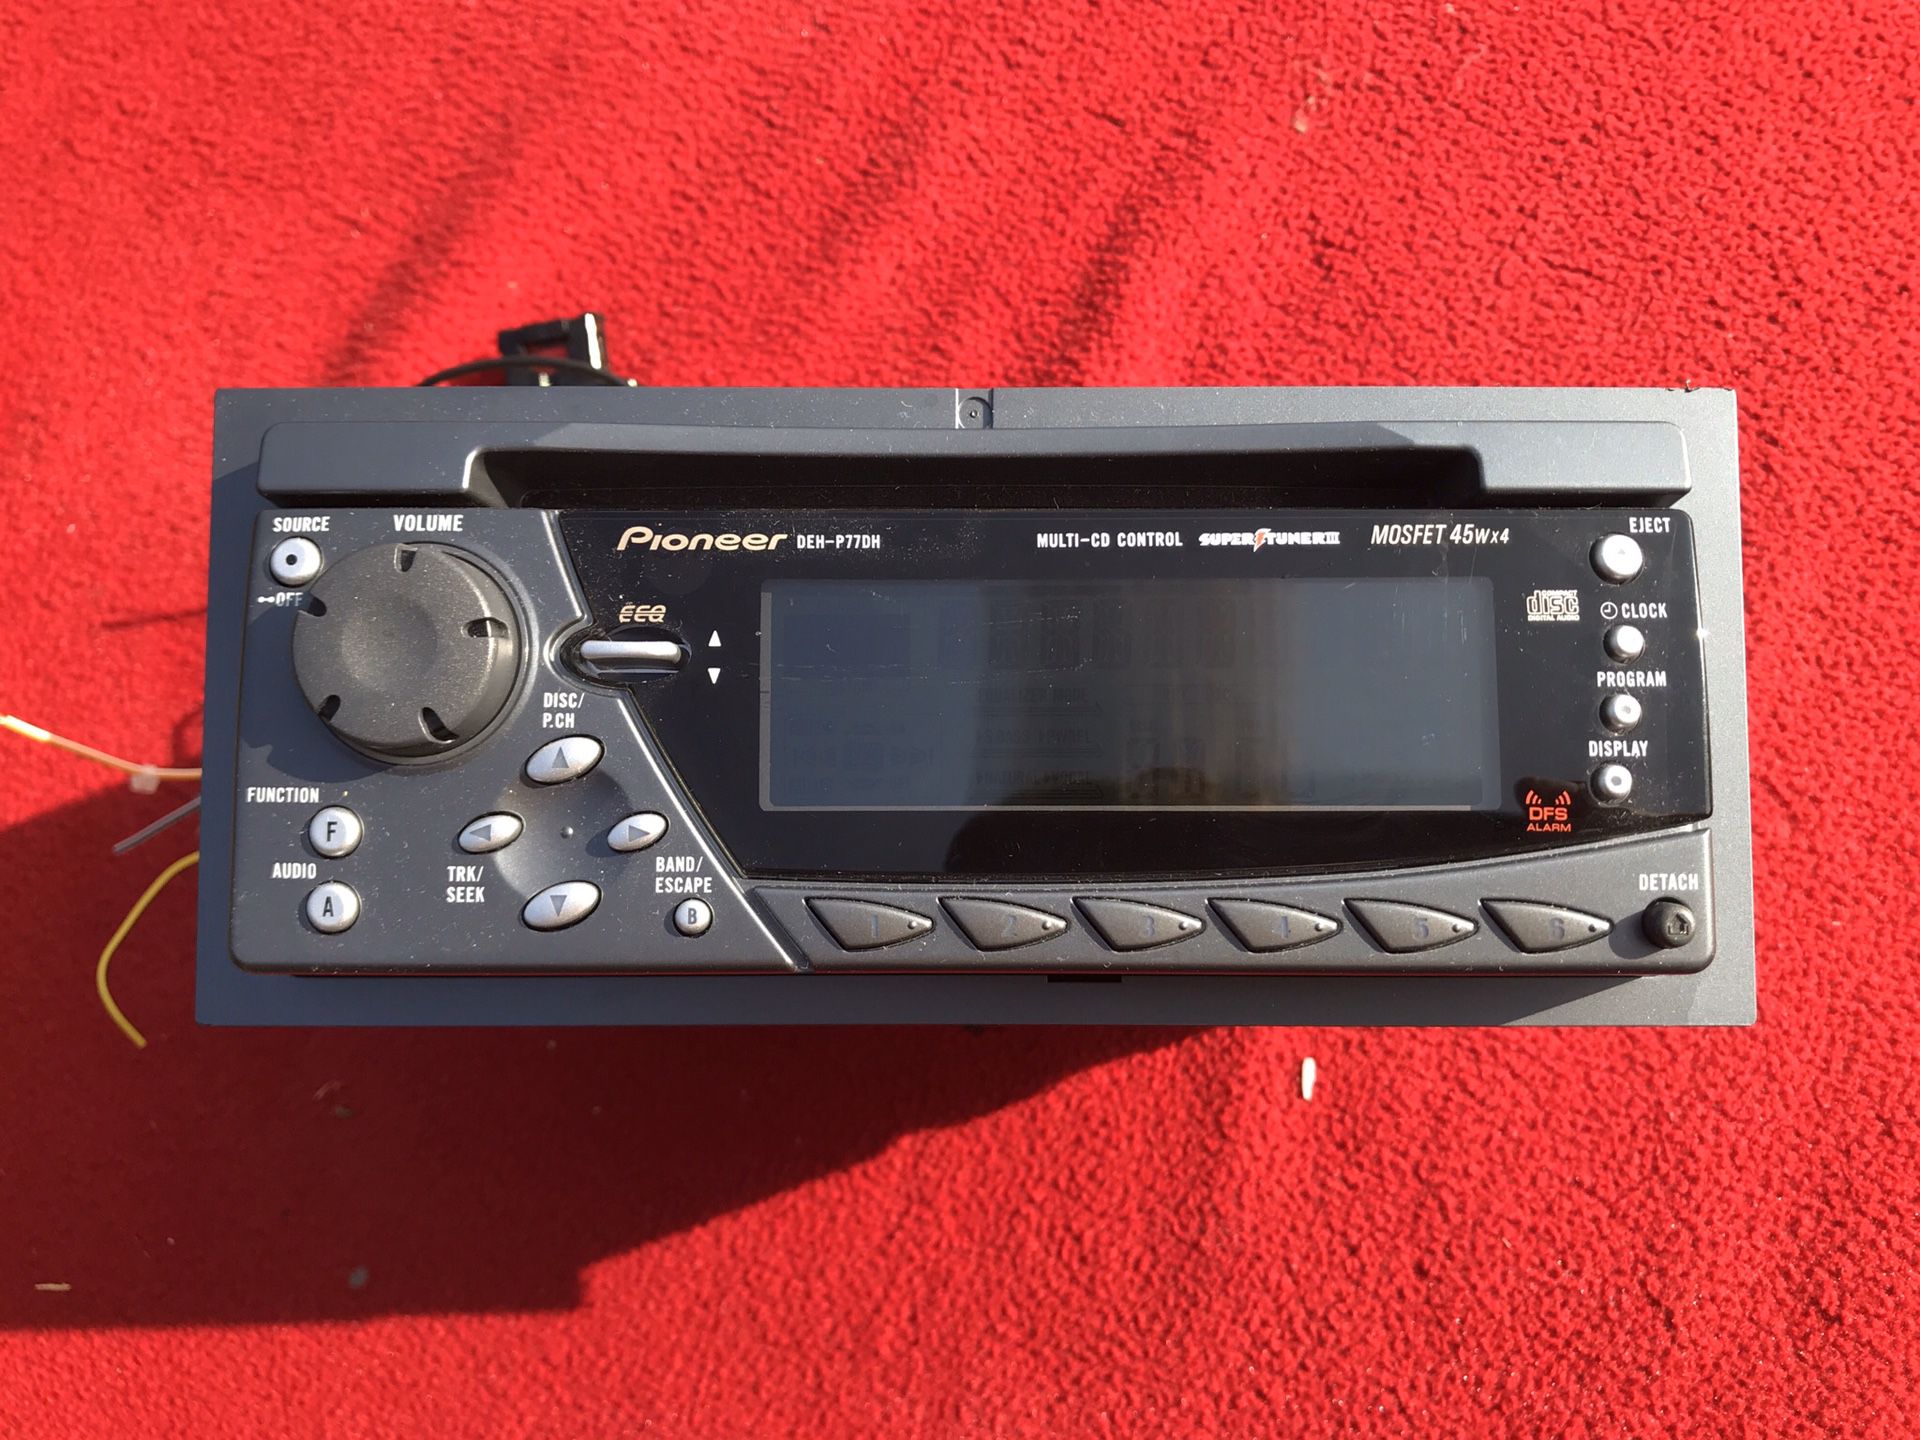 Pioneer DEH-P77DH Car Stereo Receiver CD player MOSFET 45Wx4 Not tested But looks super clean, like never used! Pickup location at 4001 N. Pima Rd